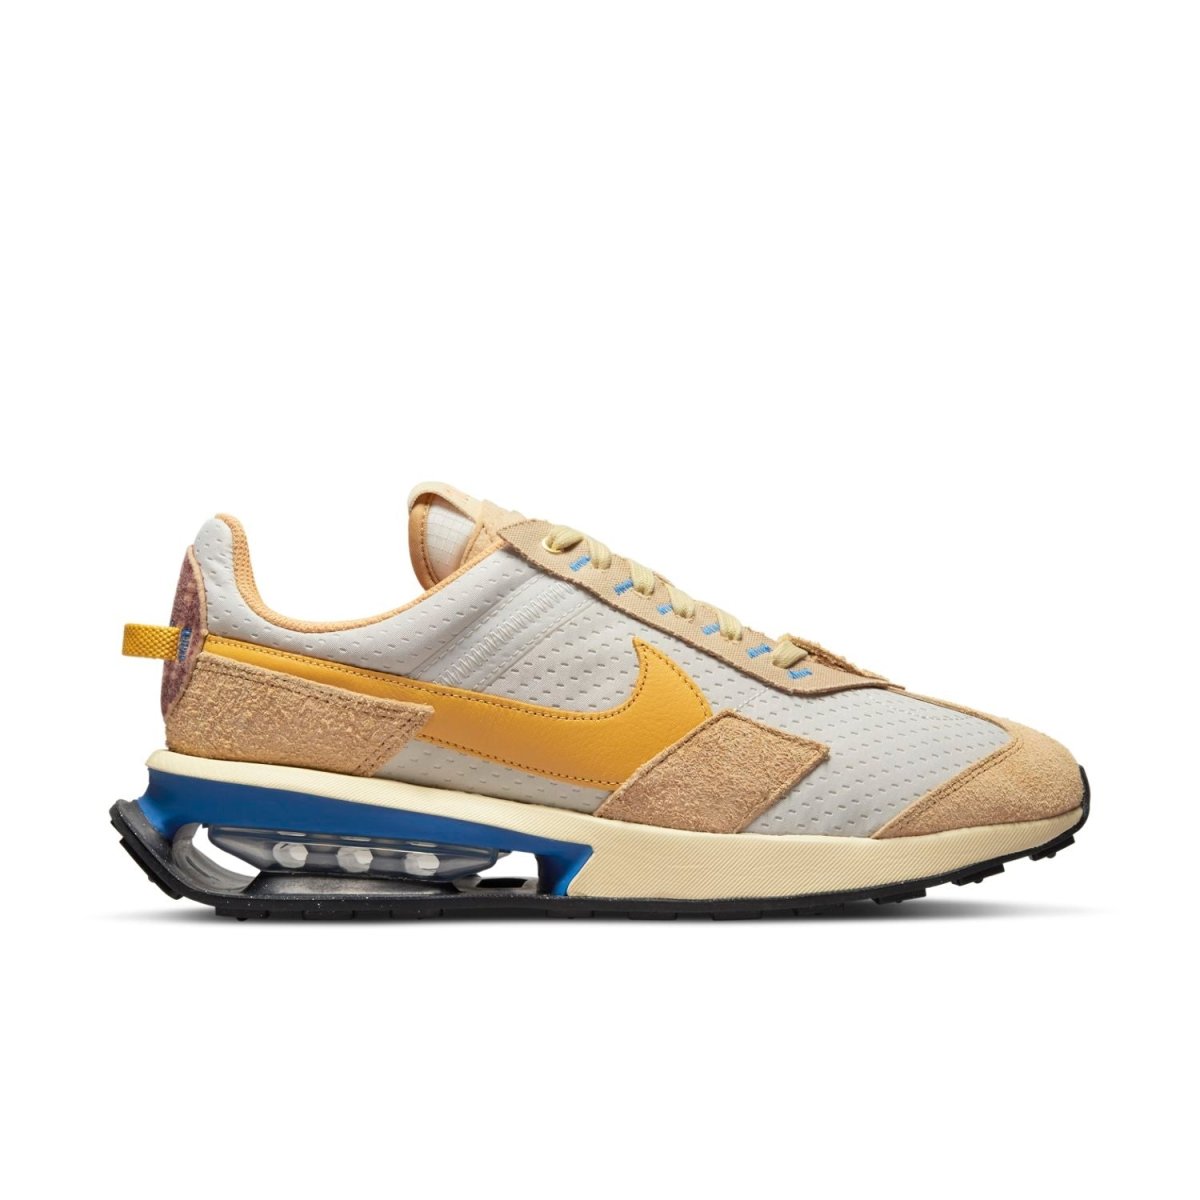 Nike Air Max Pre-Day (DO2381-737) - STNDRD ATHLETIC CO.